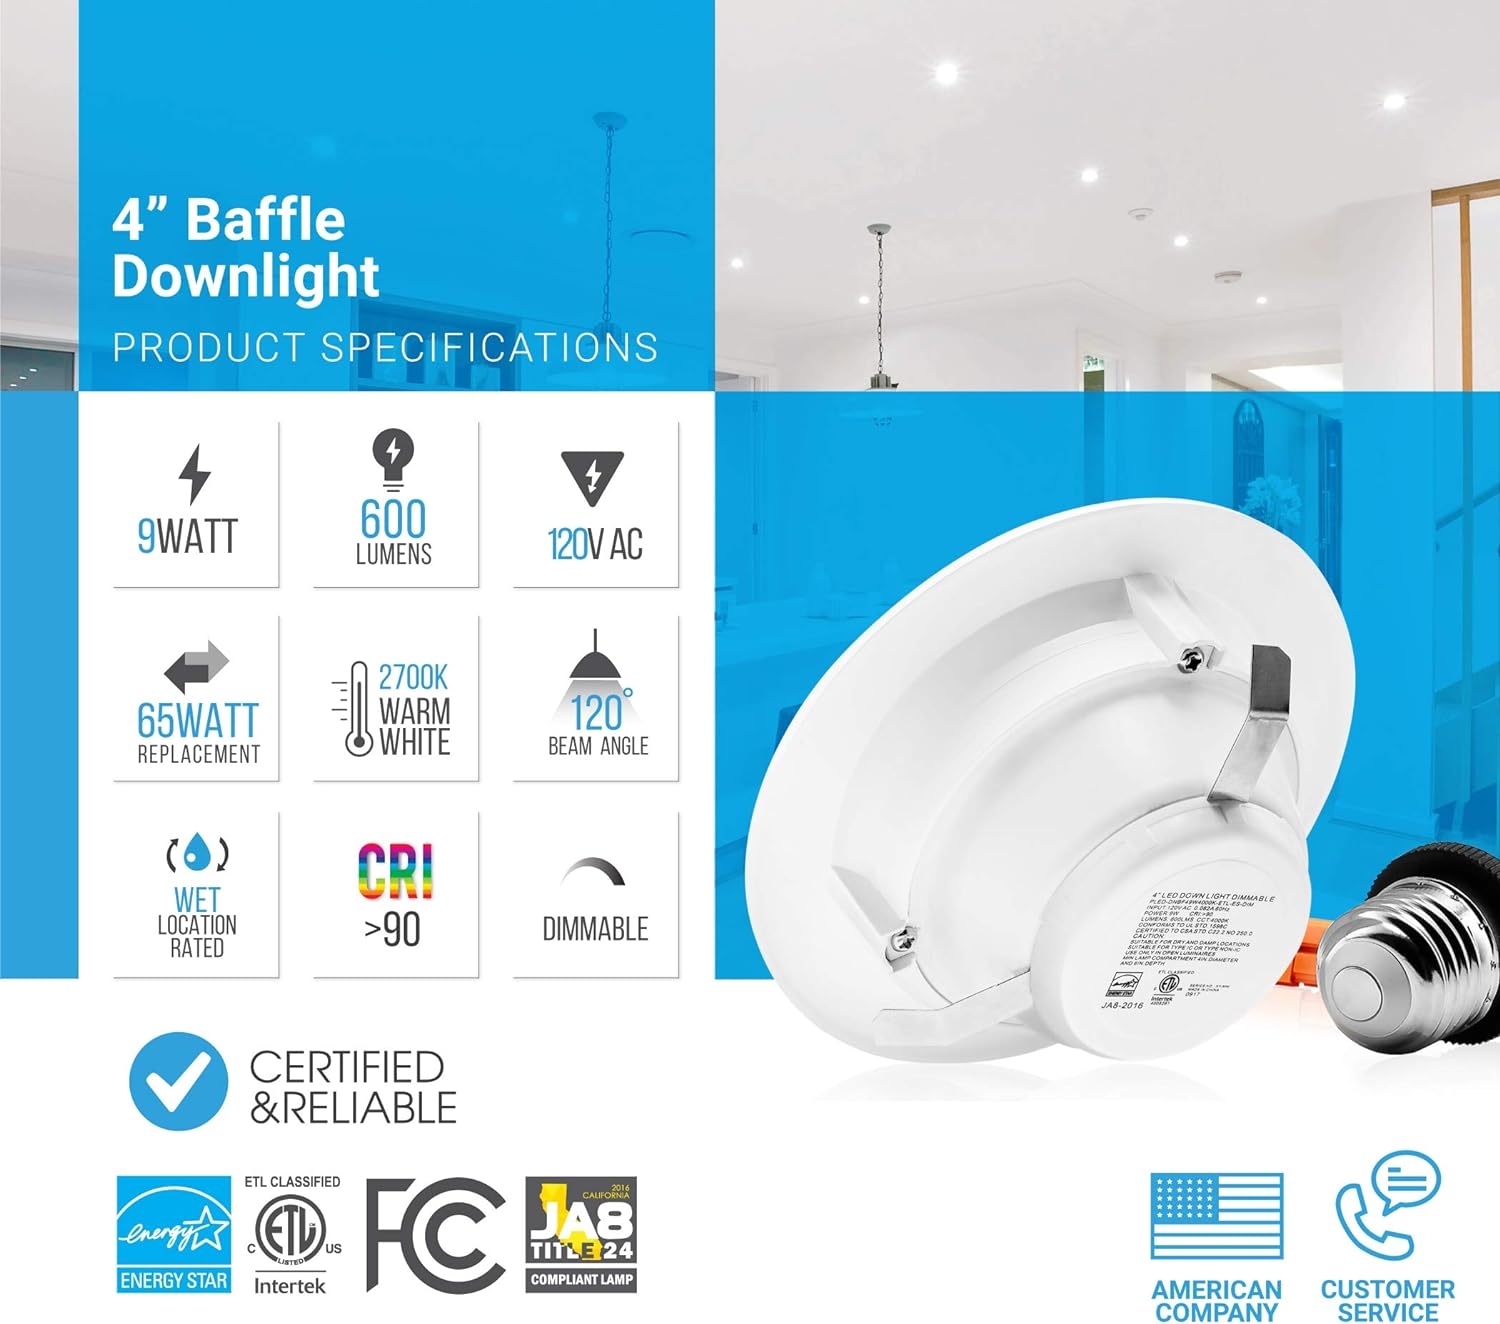 PARMIDA (12 Pack) 4 inch Dimmable LED Recessed Lighting, Retrofit Downlight, 9W (65W Replacement), 600lm, Baffle Trim, Ceiling Can Lights, Energy Star & ETL-Listed, 5 Year Warranty, 2700K